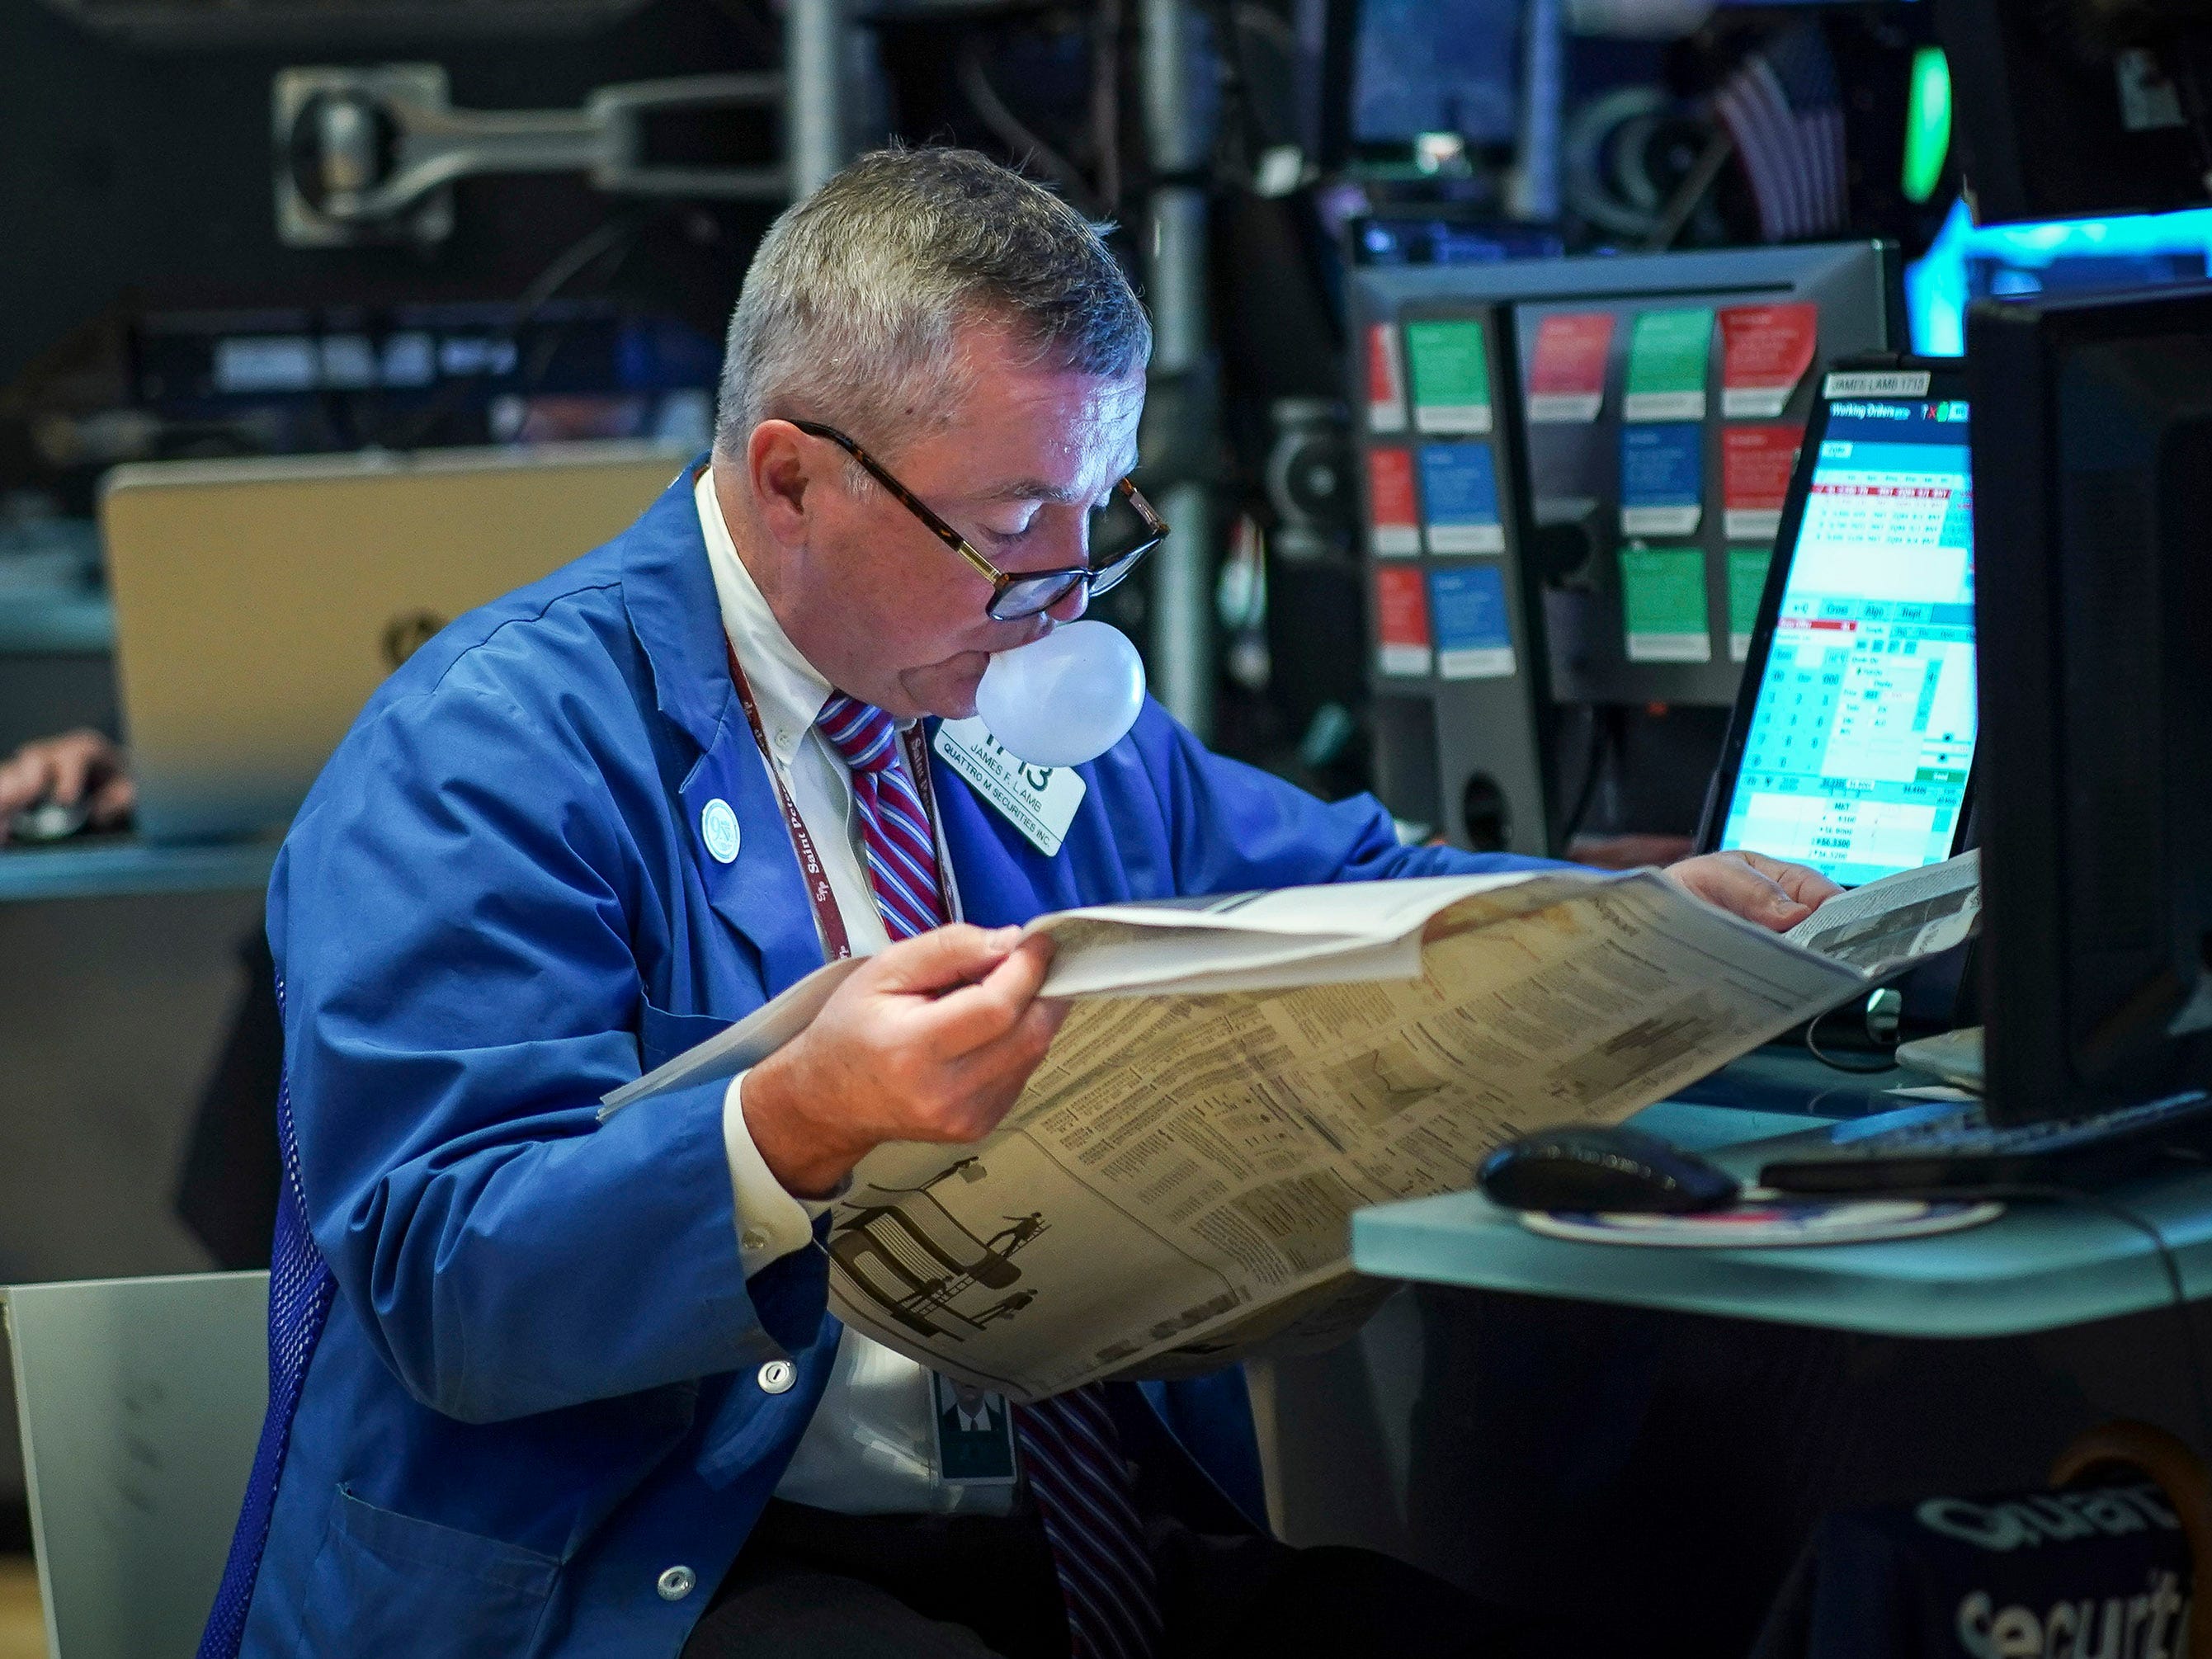 Stock market today: US stocks edge higher ahead of earnings deluge and Fed policy meeting